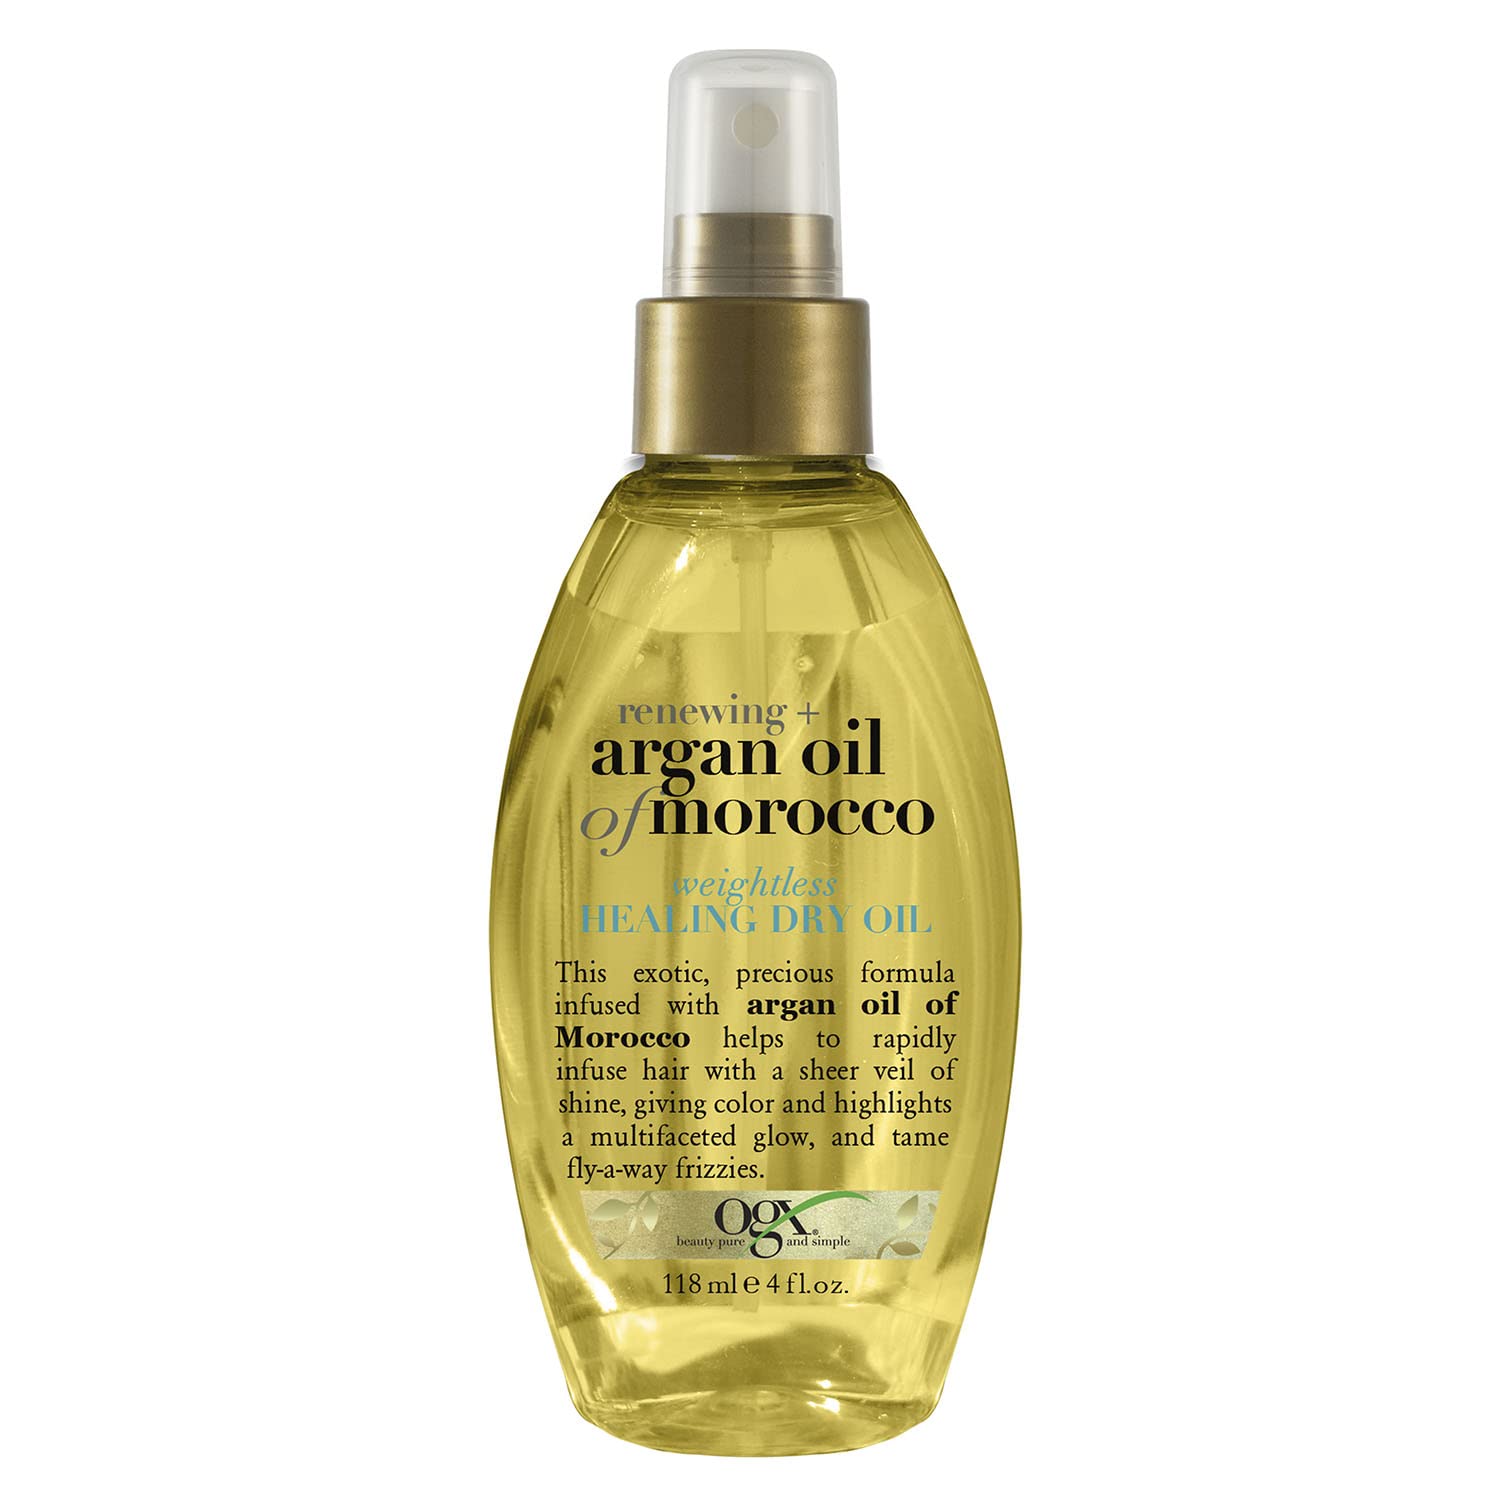 4-Oz OGX Renewing + Argan Oil of Morocco Weightless Healing Dry Oil Spray Mist for Split Ends, Frizzy Hair and Flyaways $4.30 w/ S&S + Free Shipping w/ Prime or on $25+